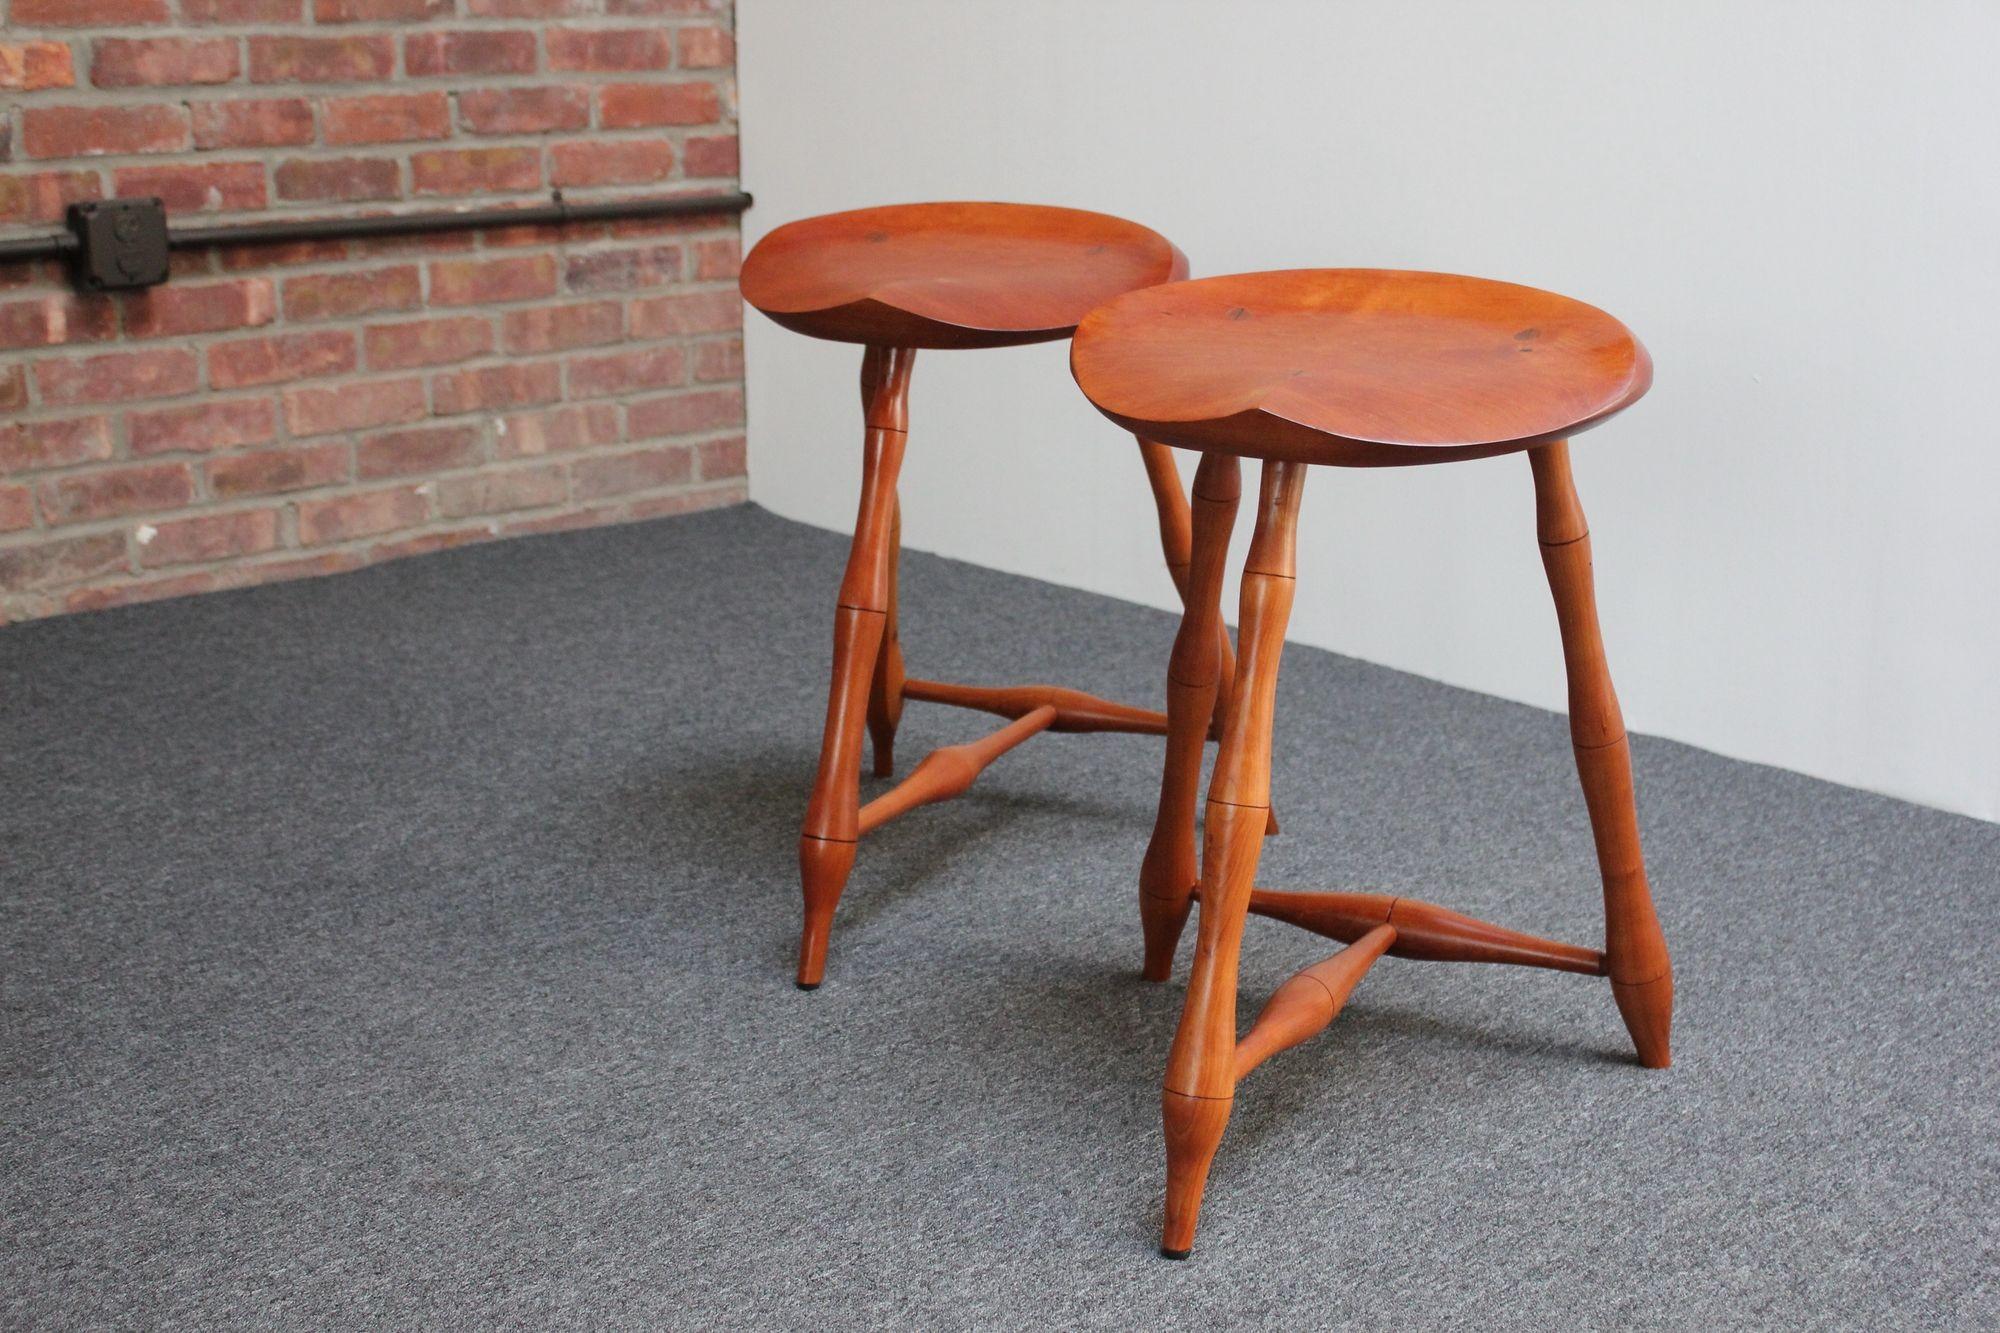 Pair of Vintage Studio Craft Windsor-Style Three Legged Low Stools in Cherrywood For Sale 8